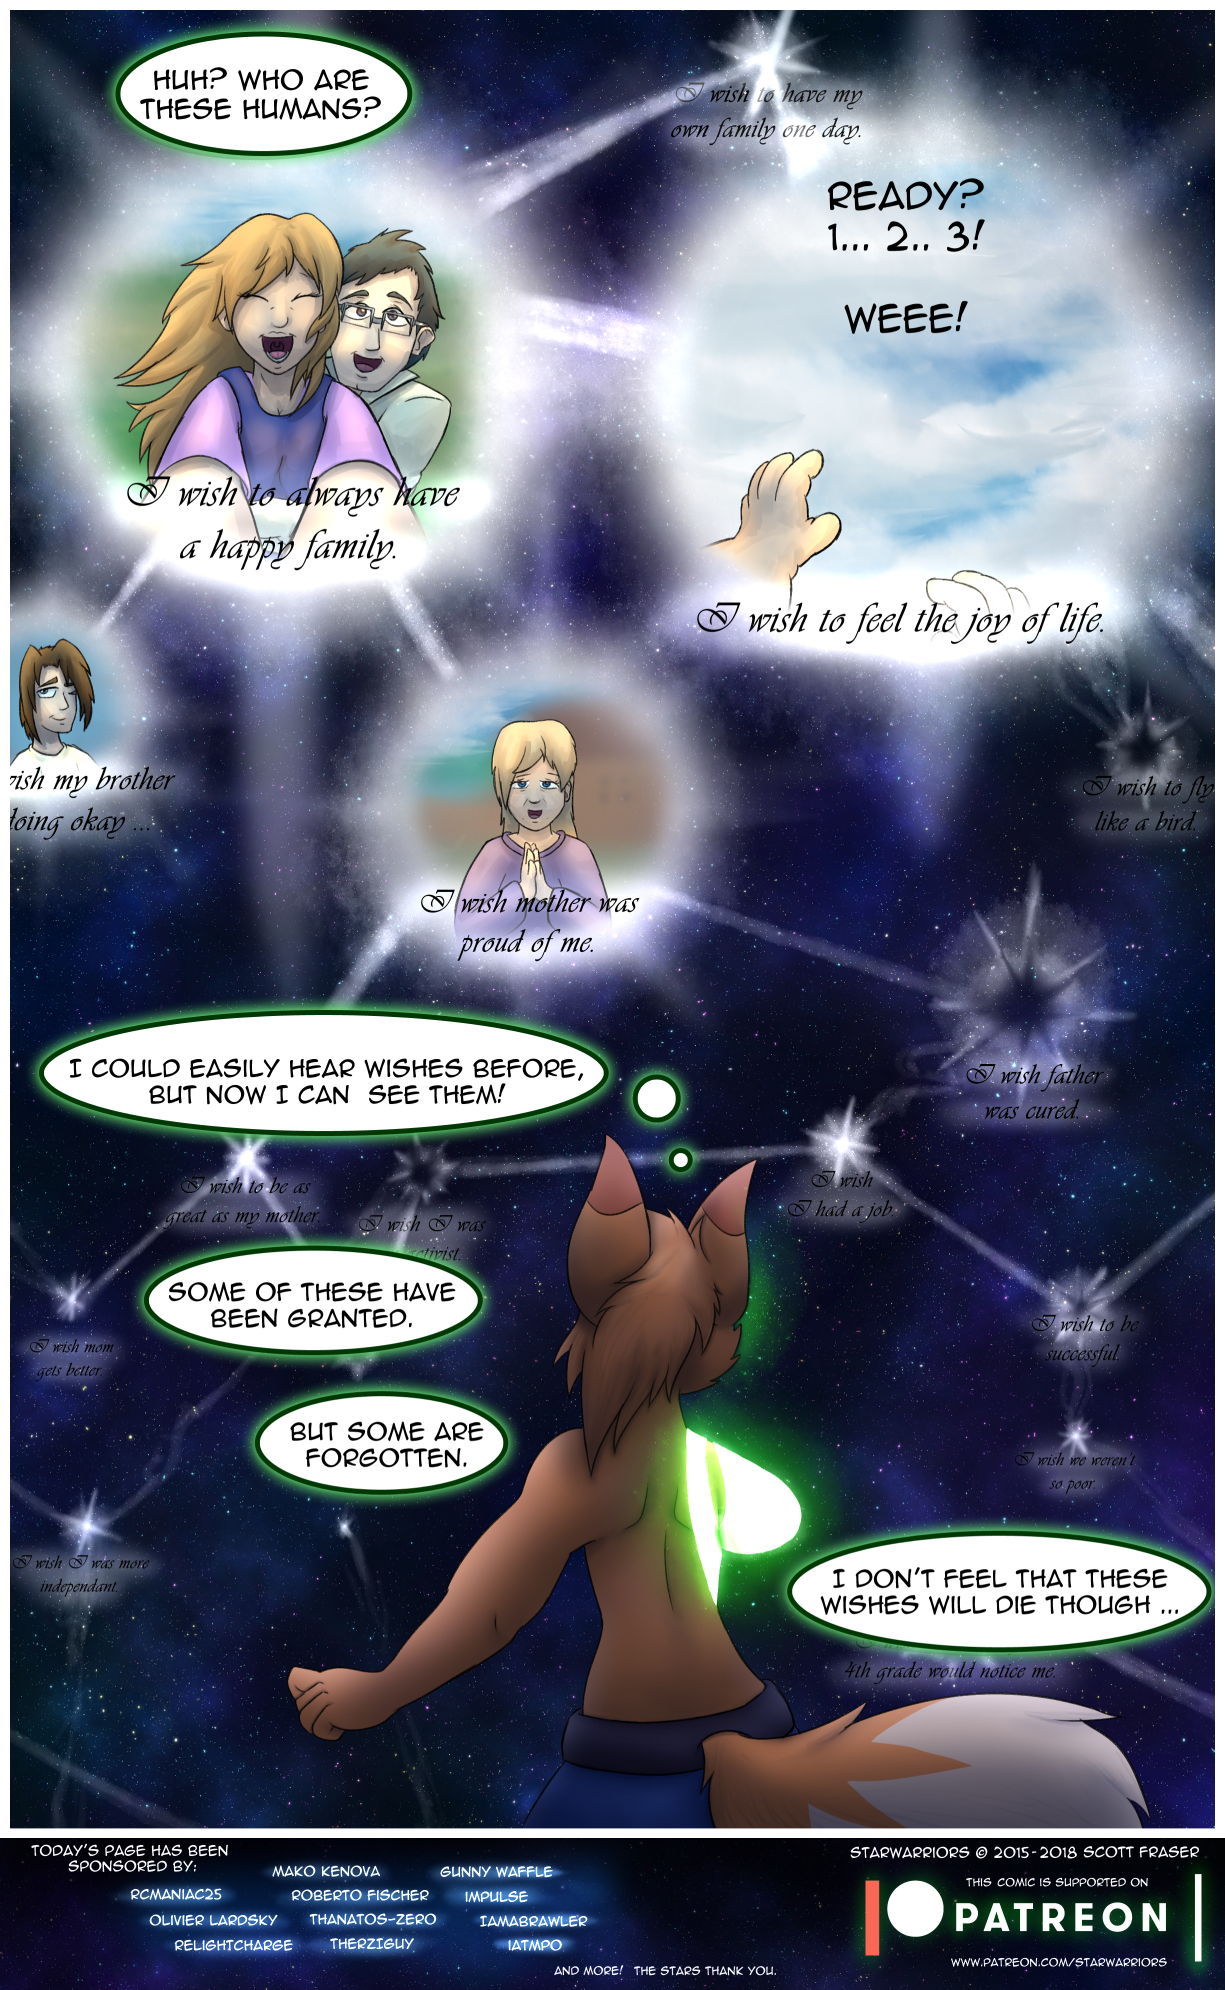 Ch3 Page 29 – Wishes